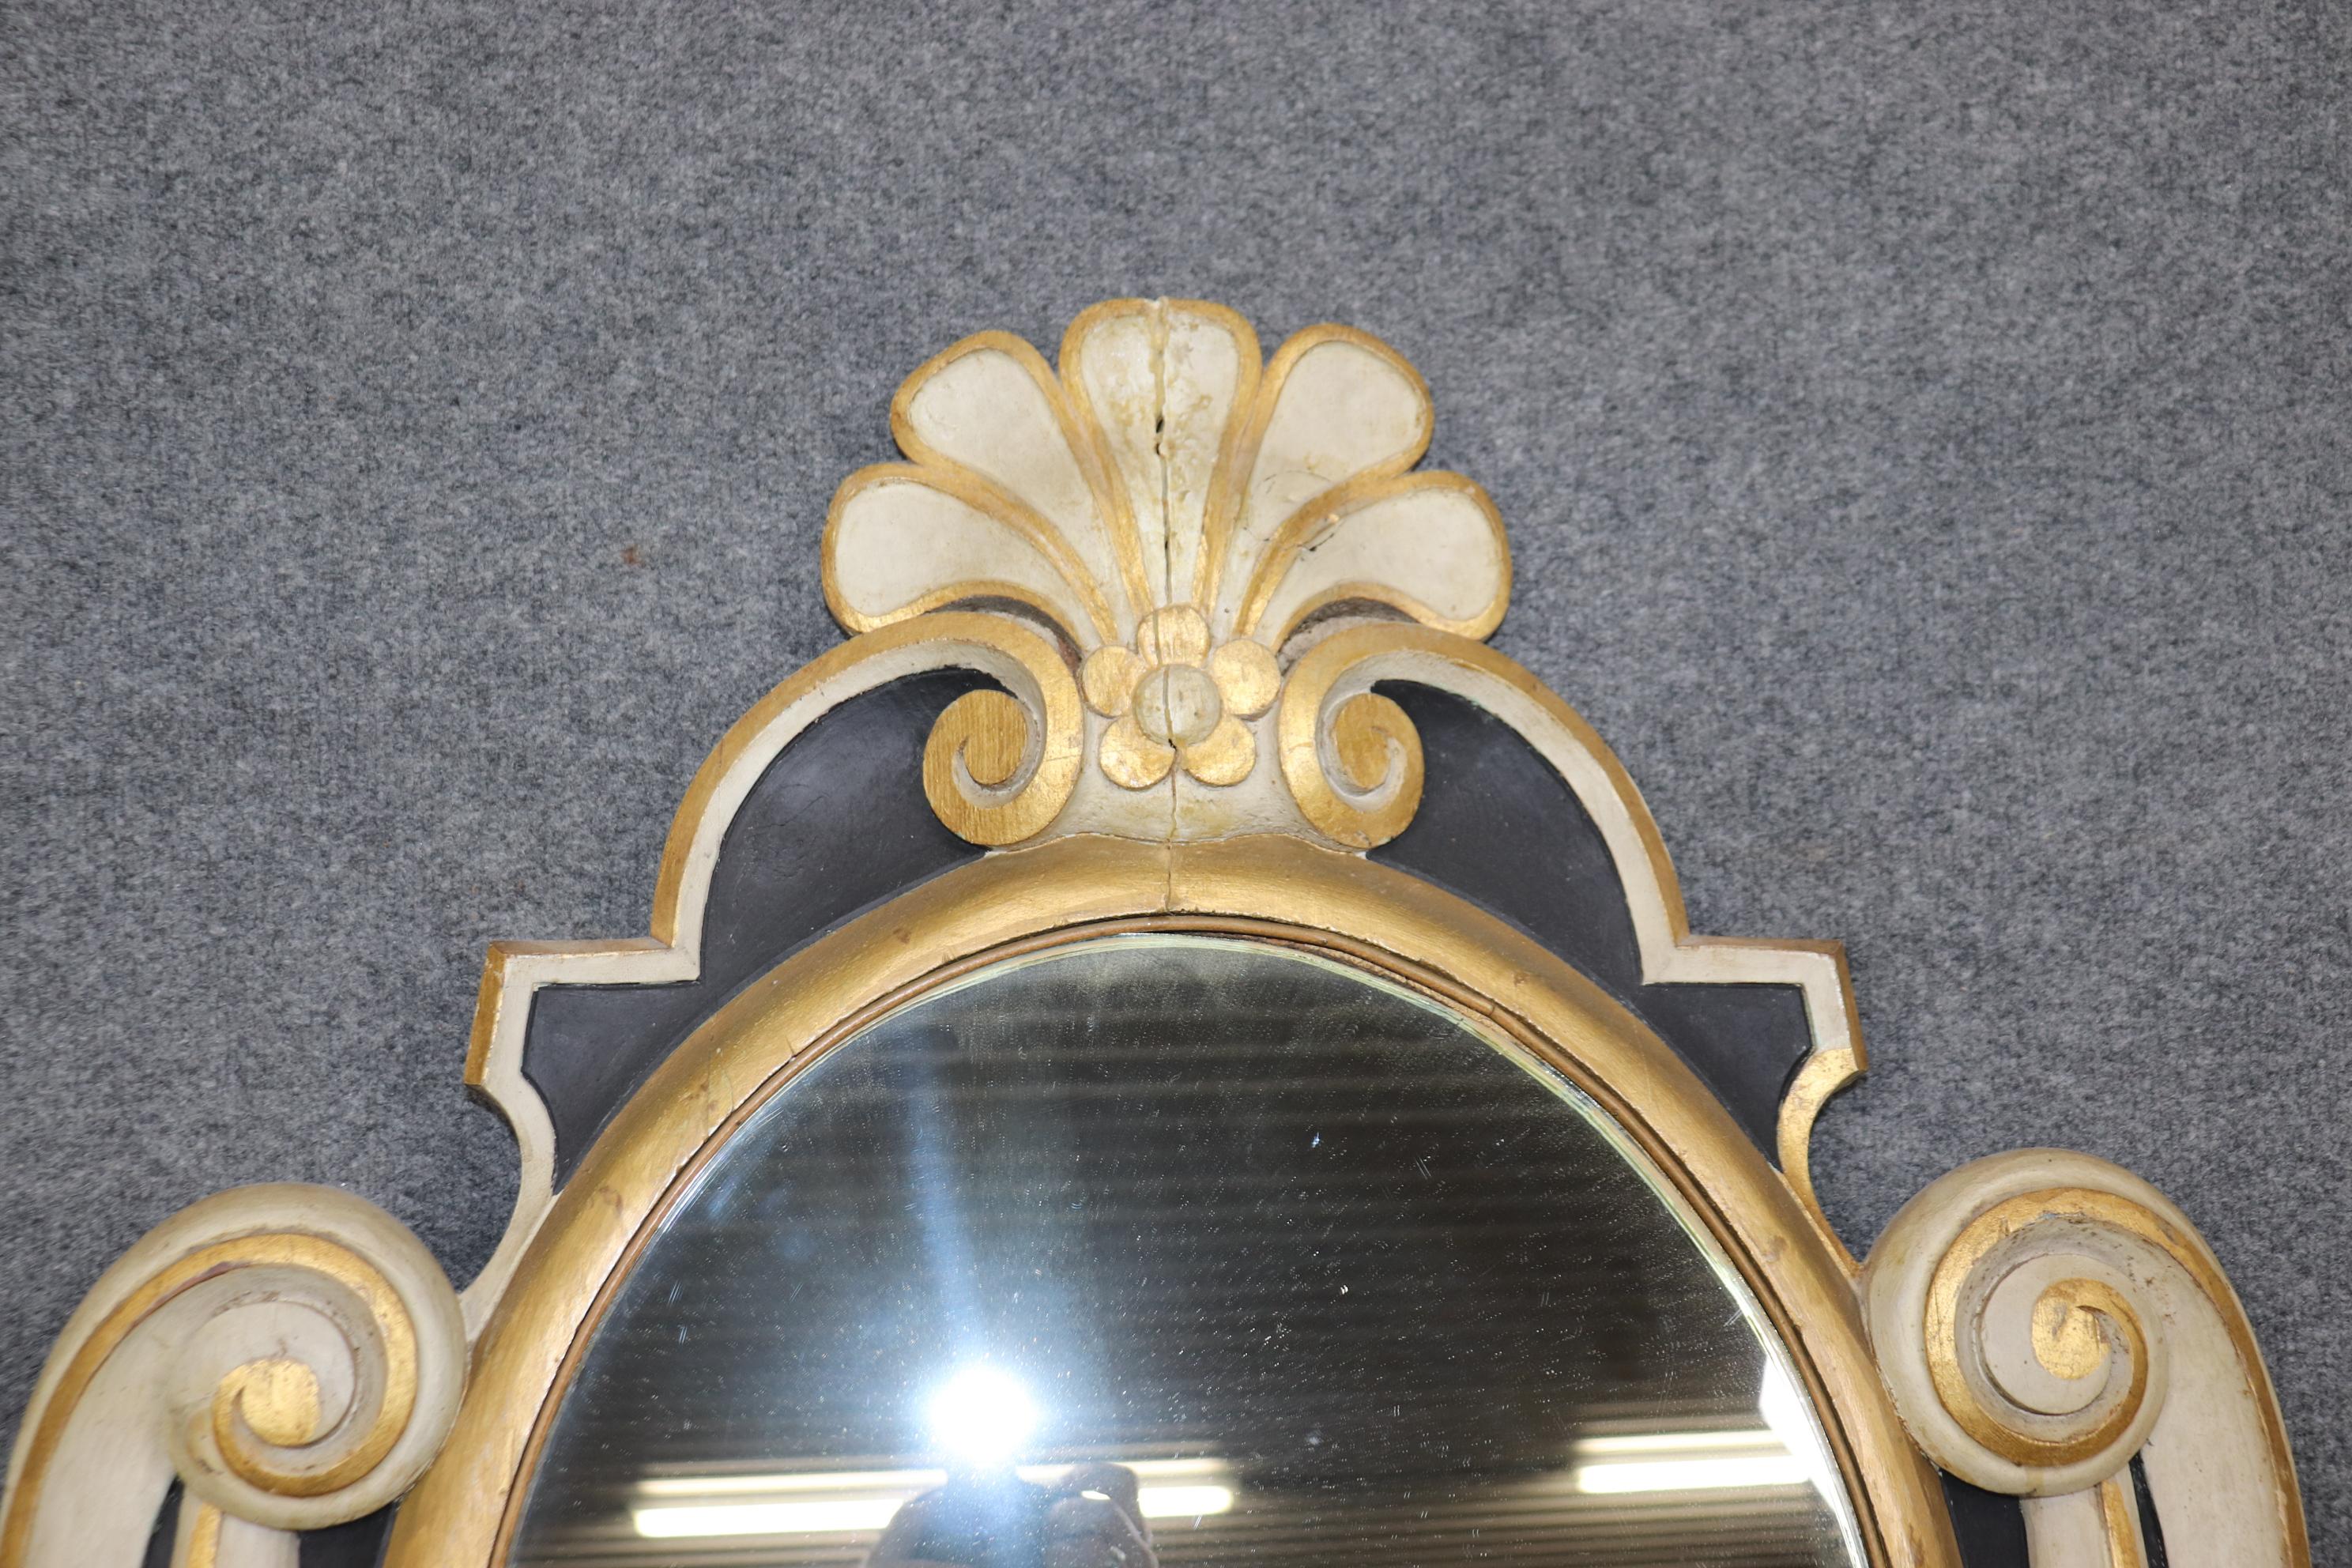 This is a superb mirror in good condition for its age. The mirror is polychromed in various colors and has a bold design and linen-fold carving. There are minor seams from construction and signs of age and use but nothing significant. Measures 41.5